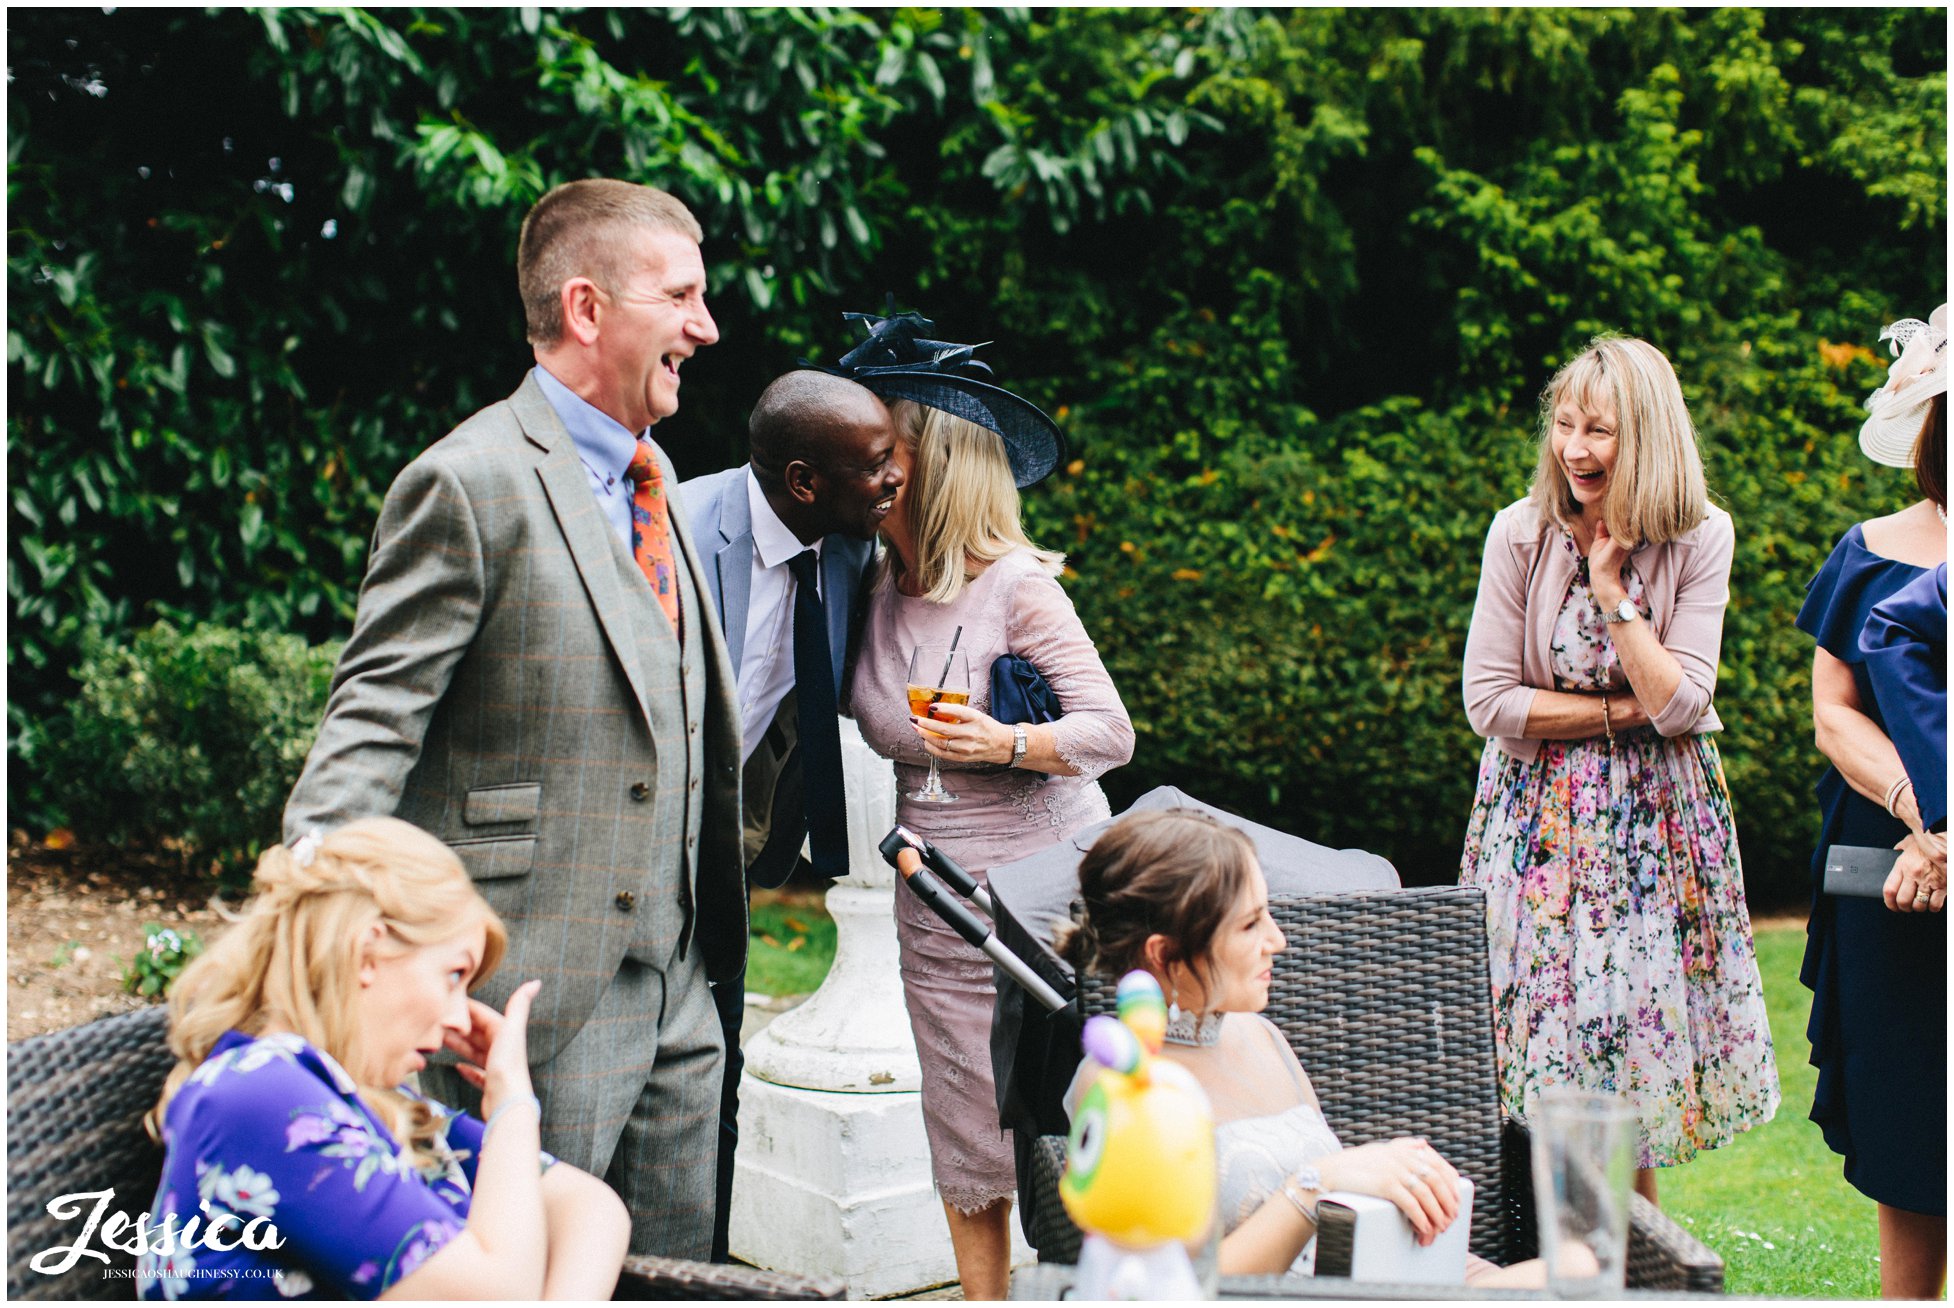 guests enjoy the nice weather at mottram hall wedding in cheshire